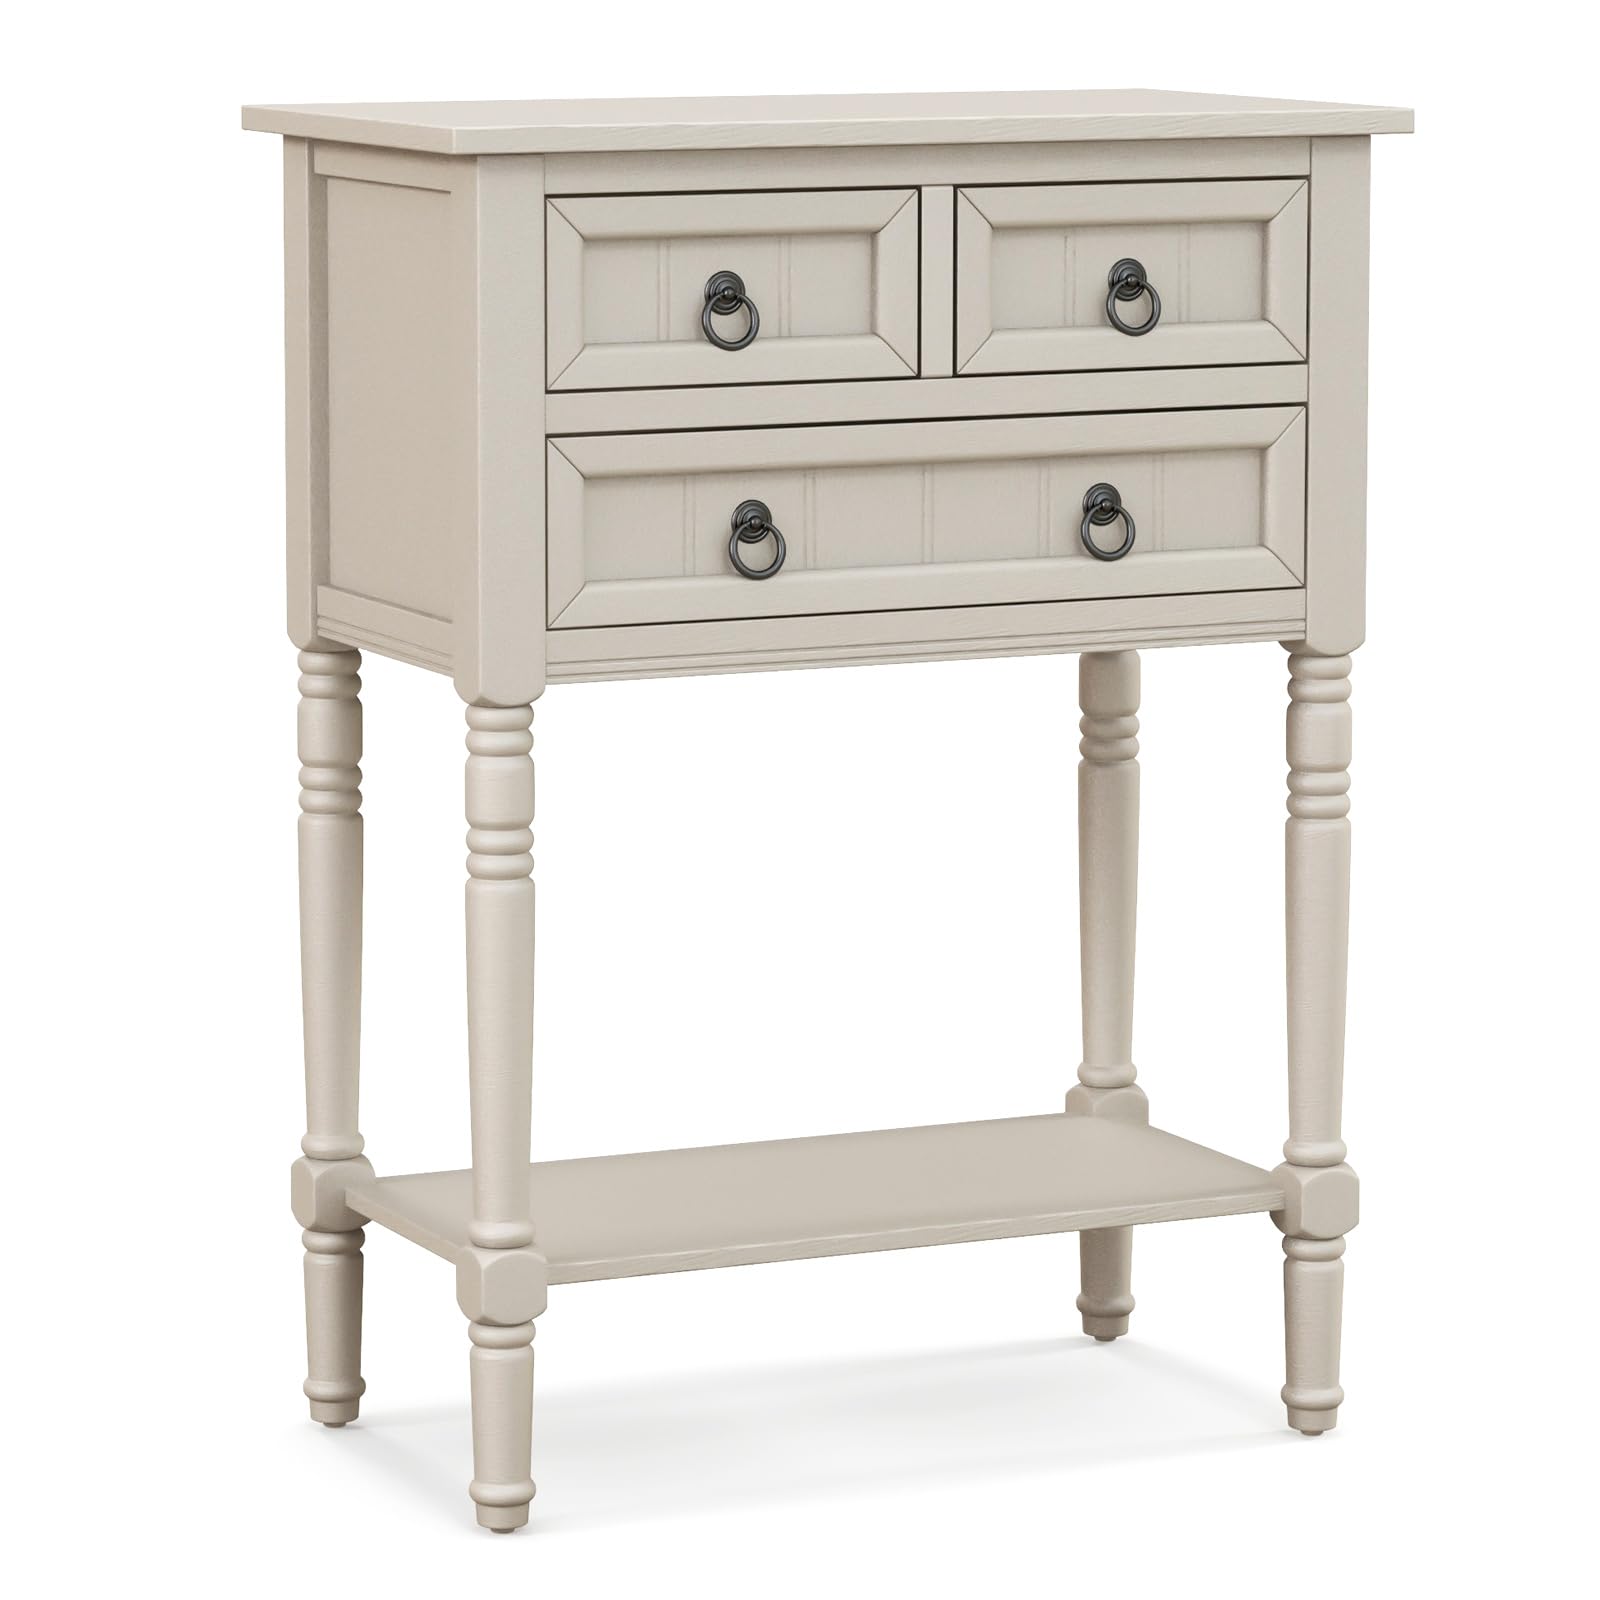 Giantex Console Table with Drawers